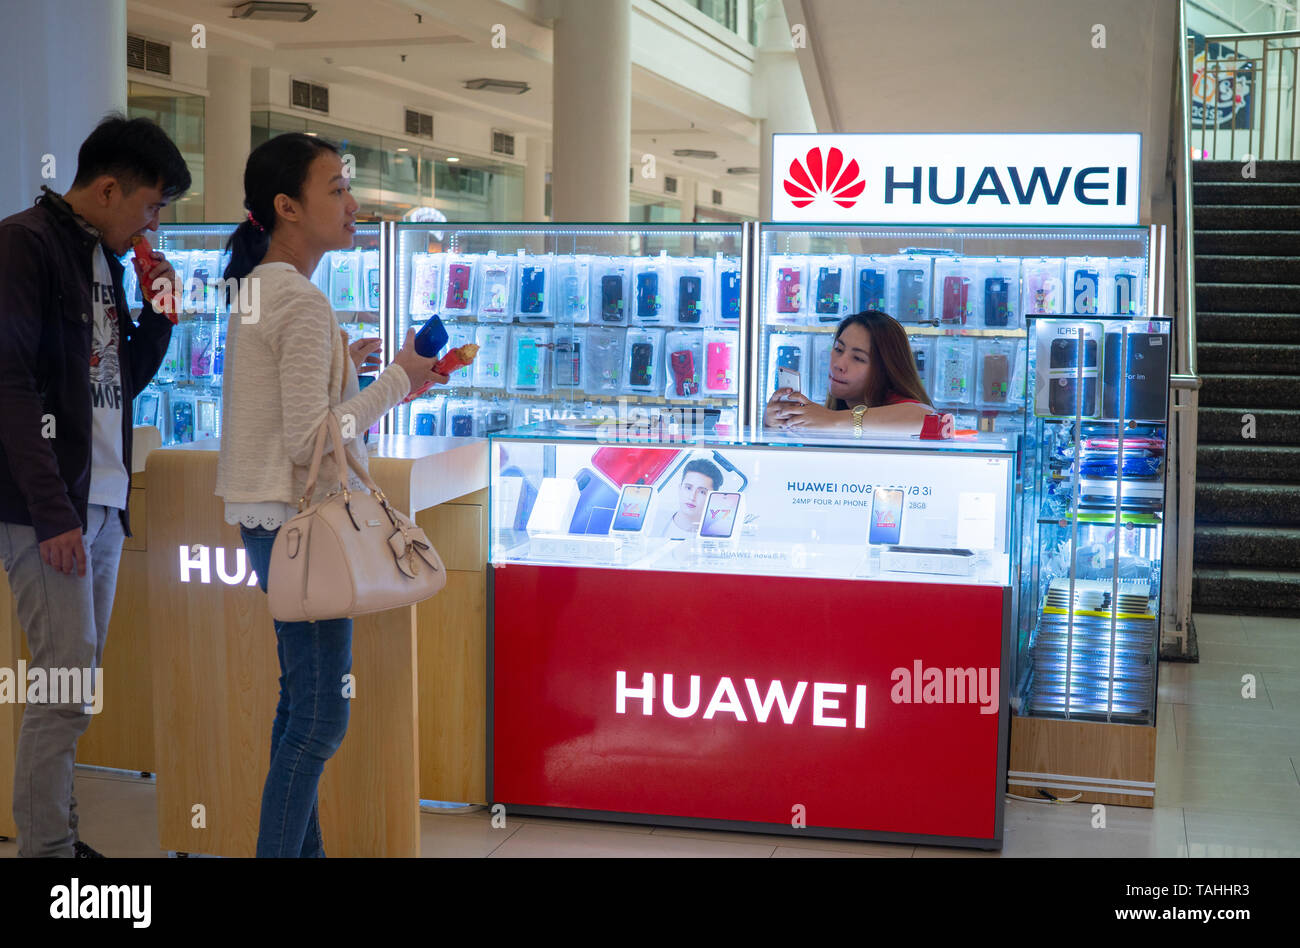 A Huawei mobile phone outlet within a Philippine shopping mall. Huawei are considered as one of the top selling mobile phone brands in the country. Stock Photo